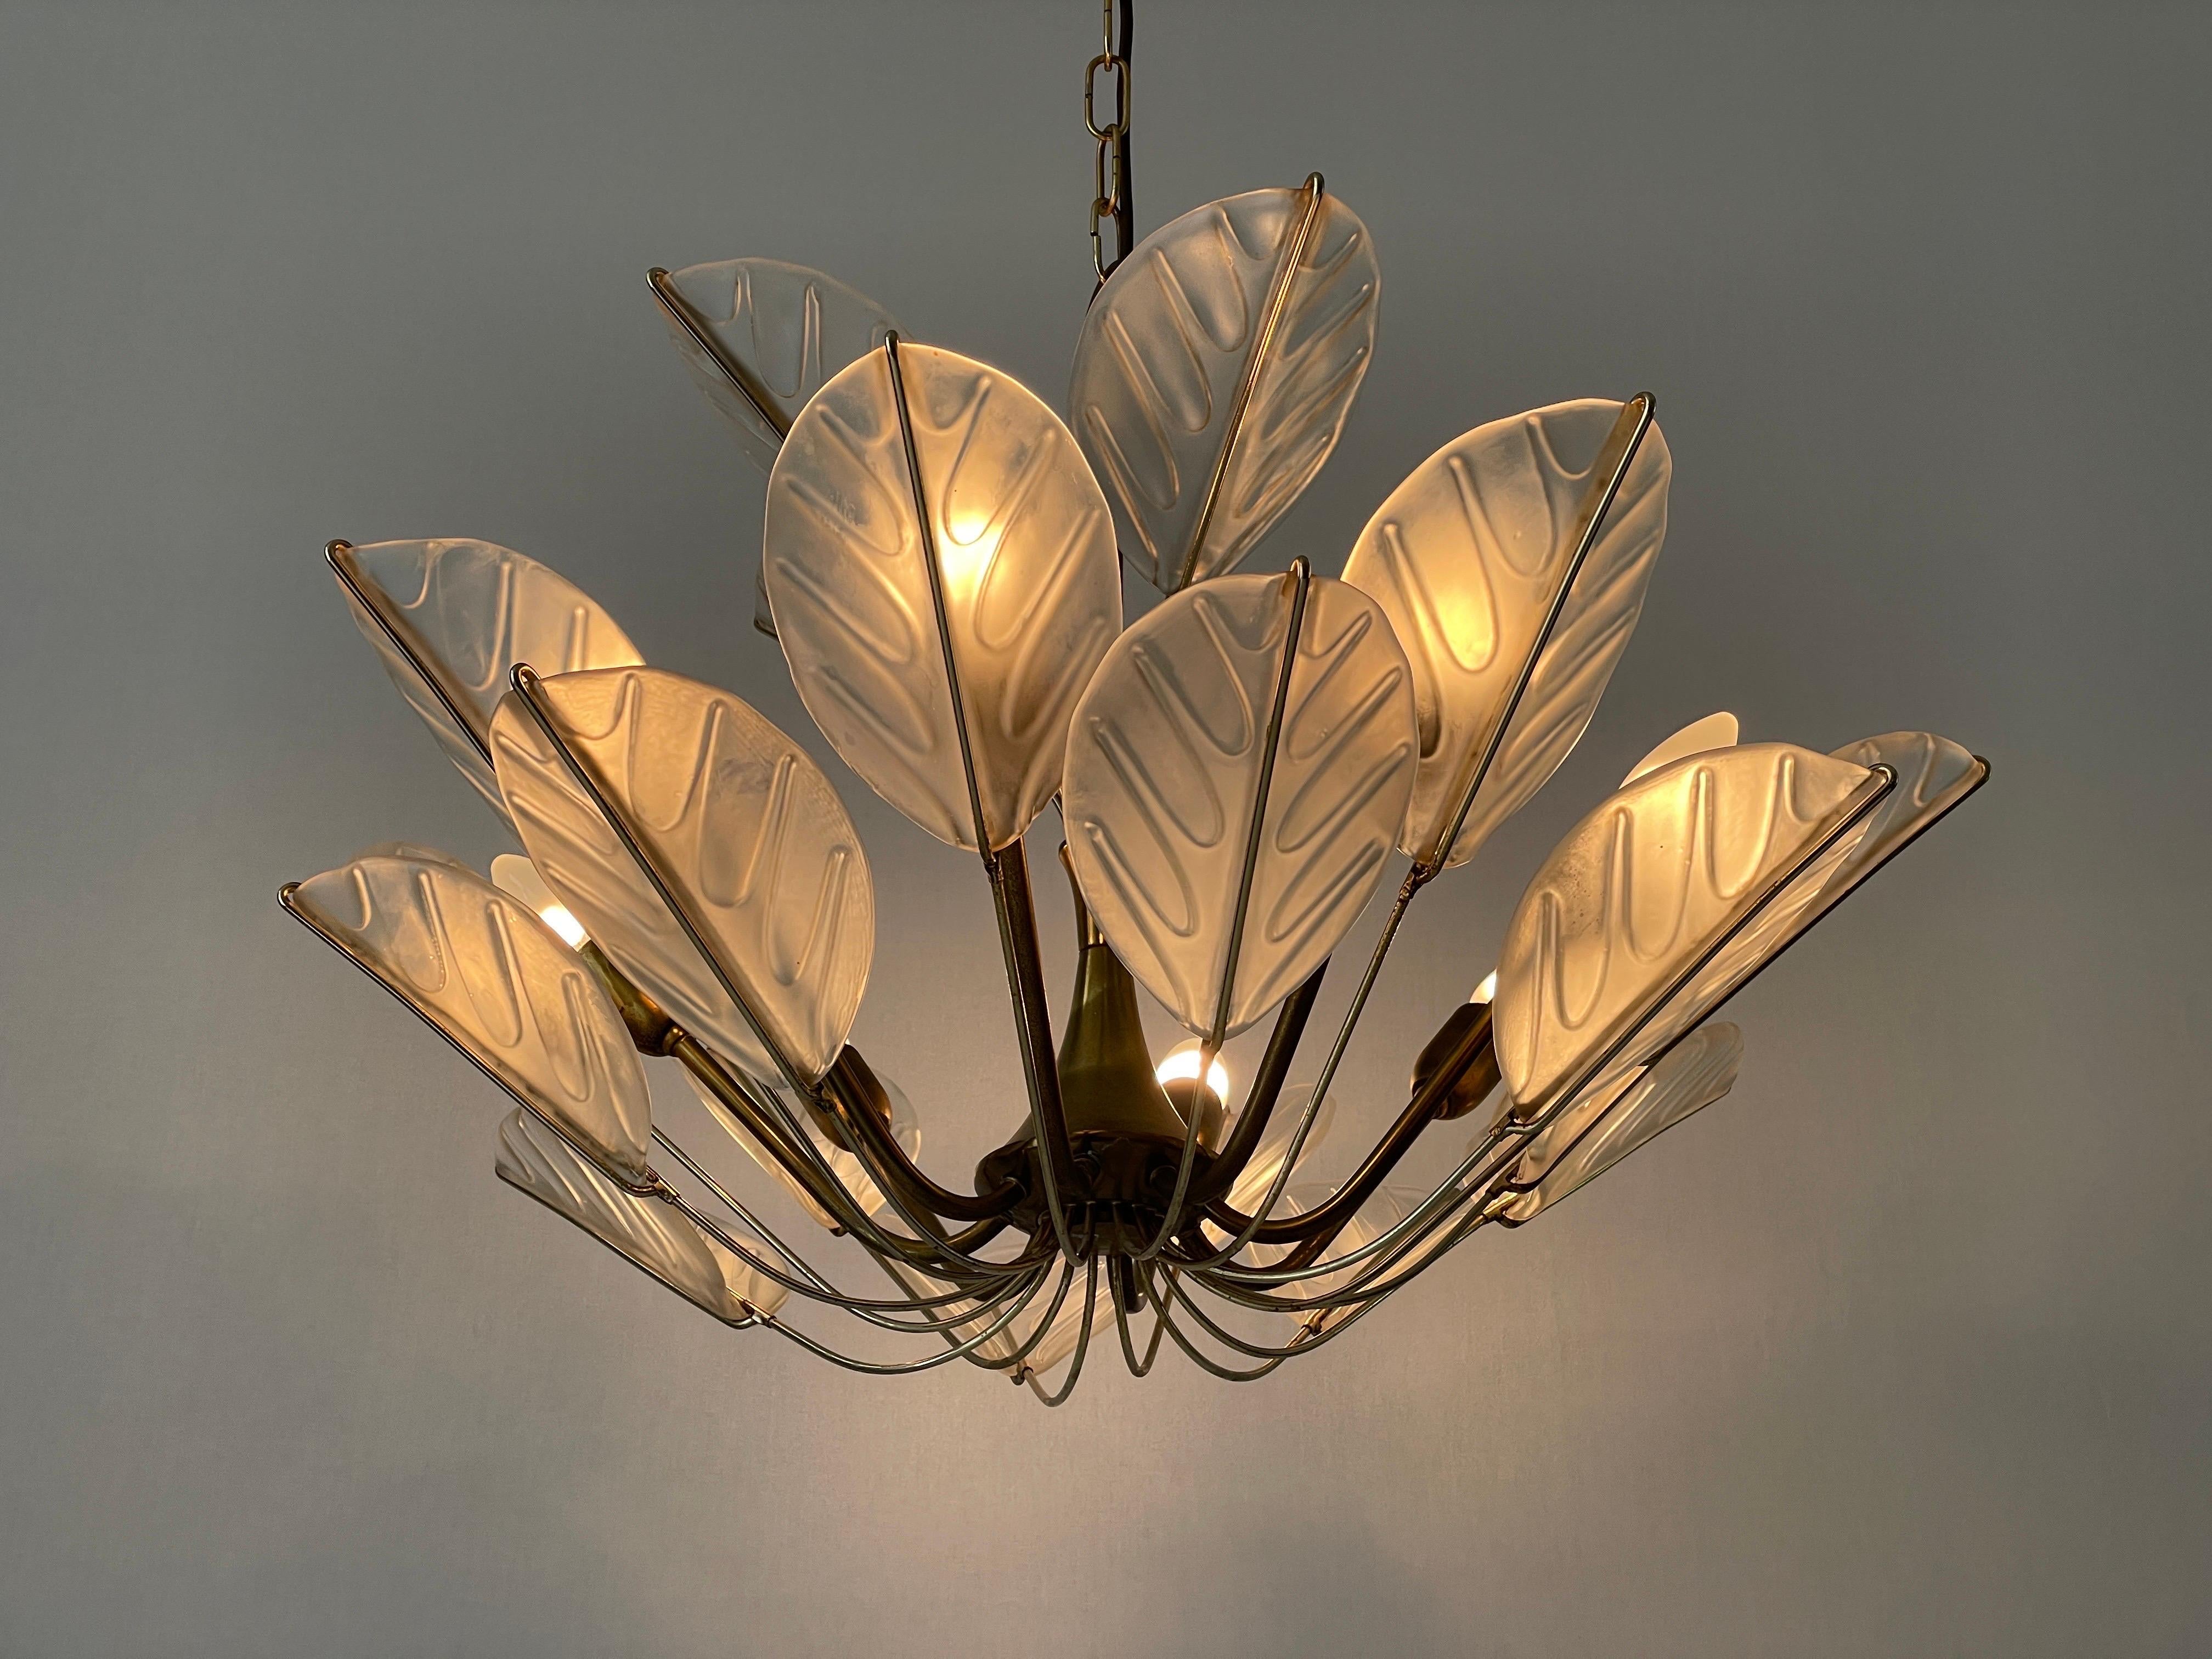 Luxurious 8-armed Brass Chandelier with Crystal Glass Leaves, 1960s, Germany For Sale 7